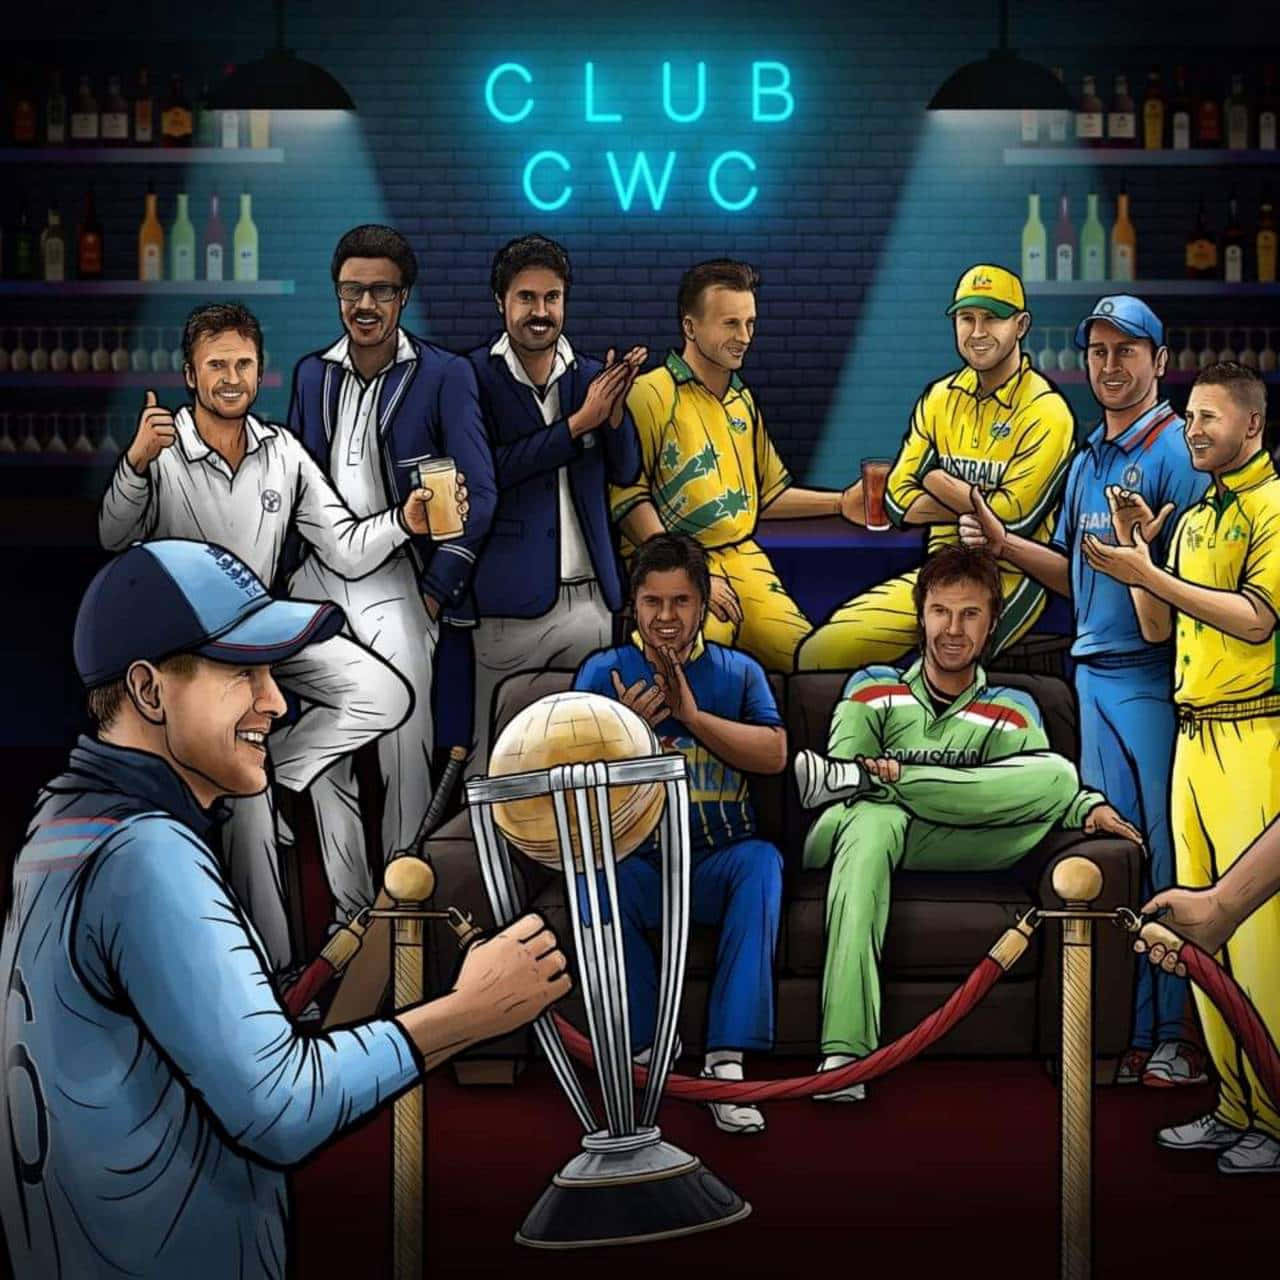 Club Cricket World Cup - A Group Of People In A Bar Background